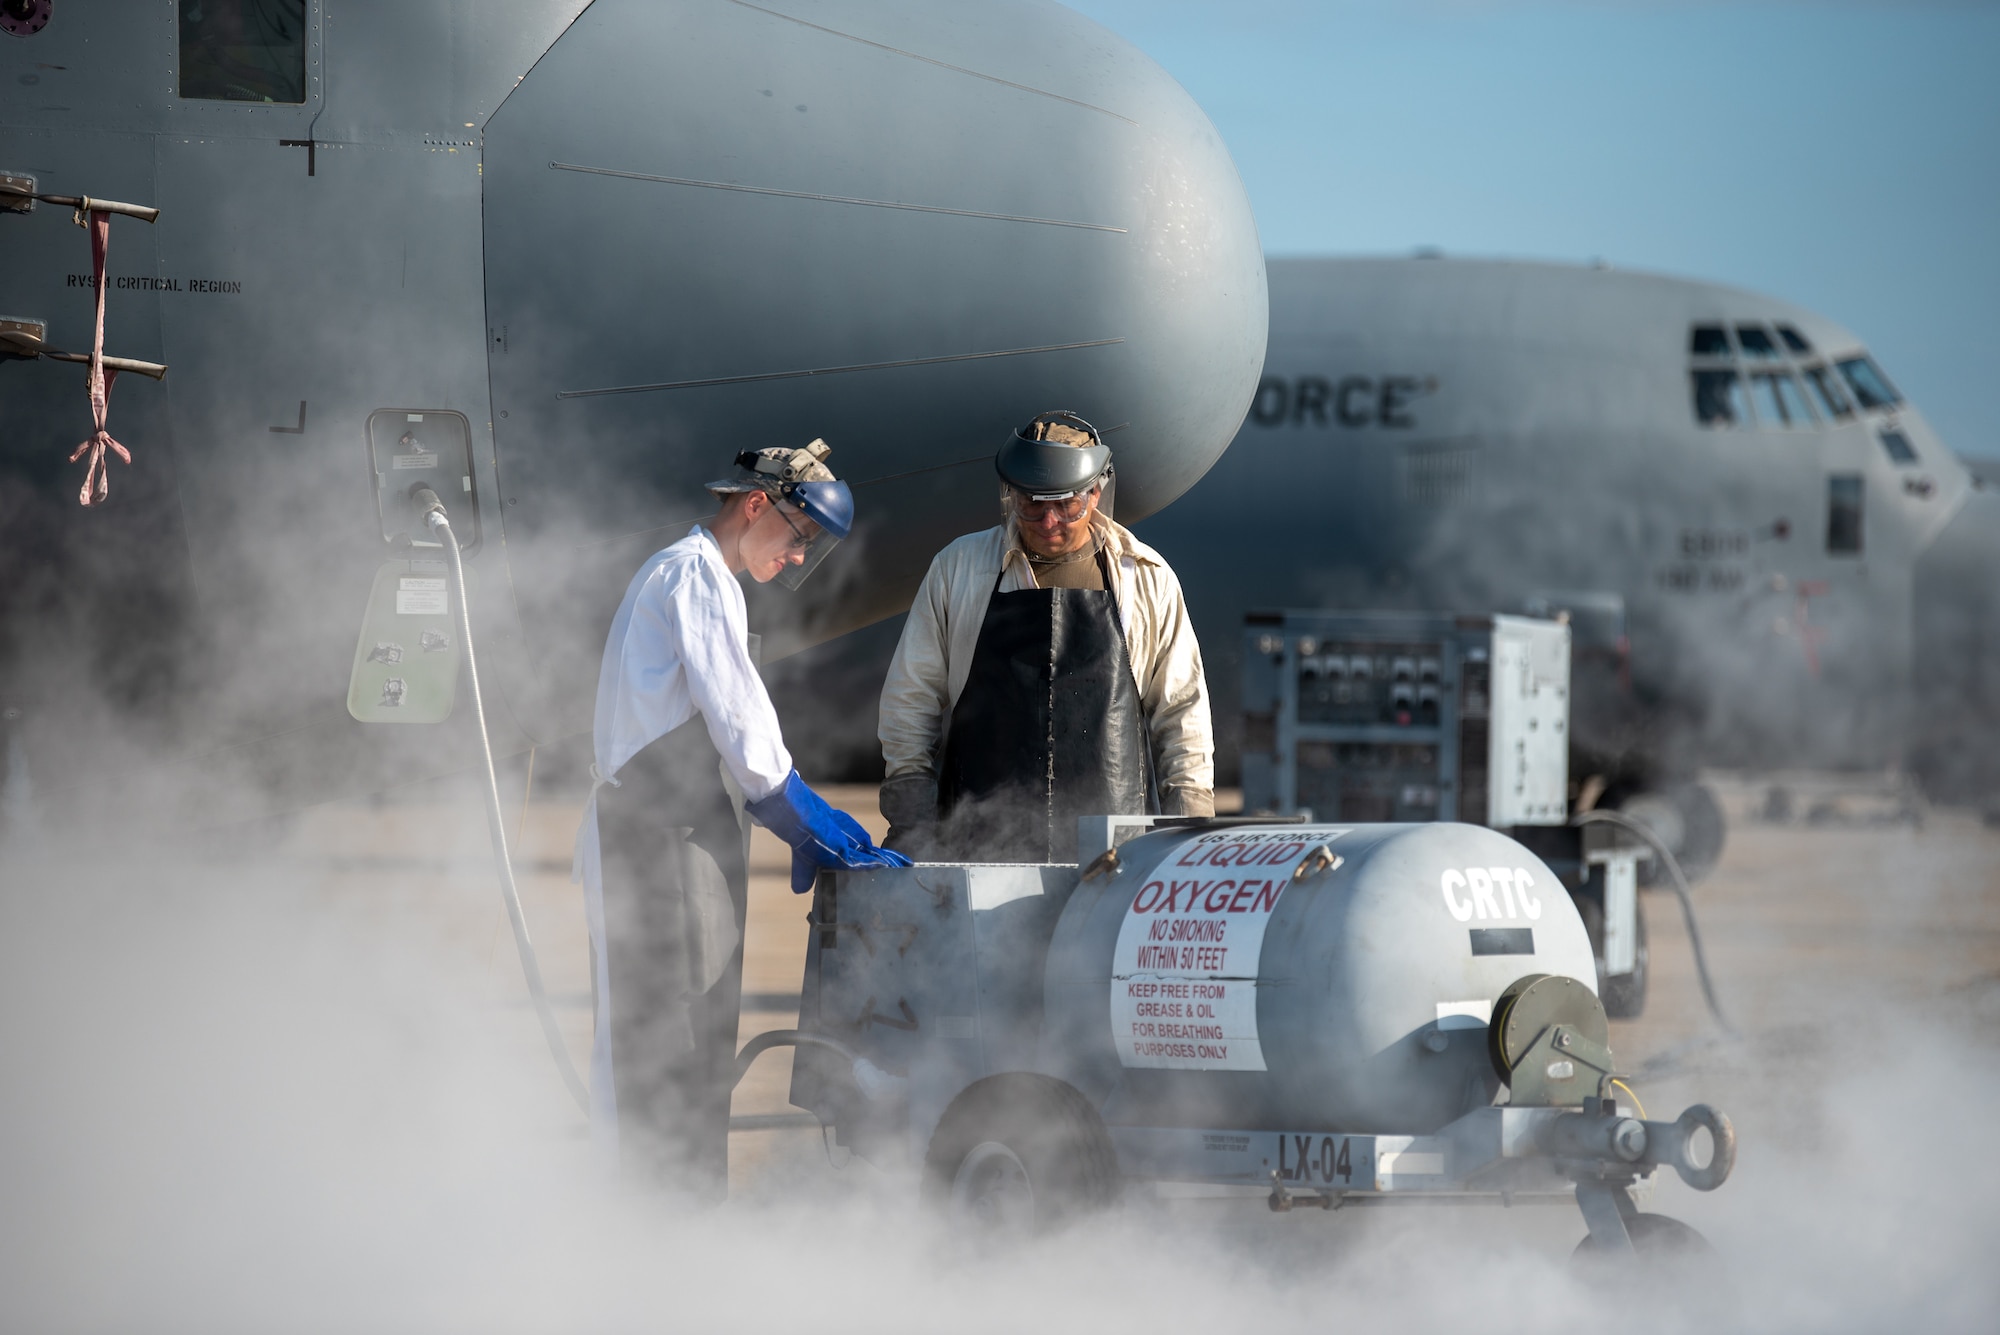 Airmen service the liquid oxygen system on a C-130J Super Hercules at the Gulfport Combat Readiness Training Center in Gulfport, Miss., Aug. 14, 2022, as part of Maintenance University. More than 300 Air Guardsmen from Kentucky, Texas, West Virginia, Rhode Island and California trained on career-specific proficiencies during the intensive week-long course. (U.S Air National Guard photo by Phil Speck)